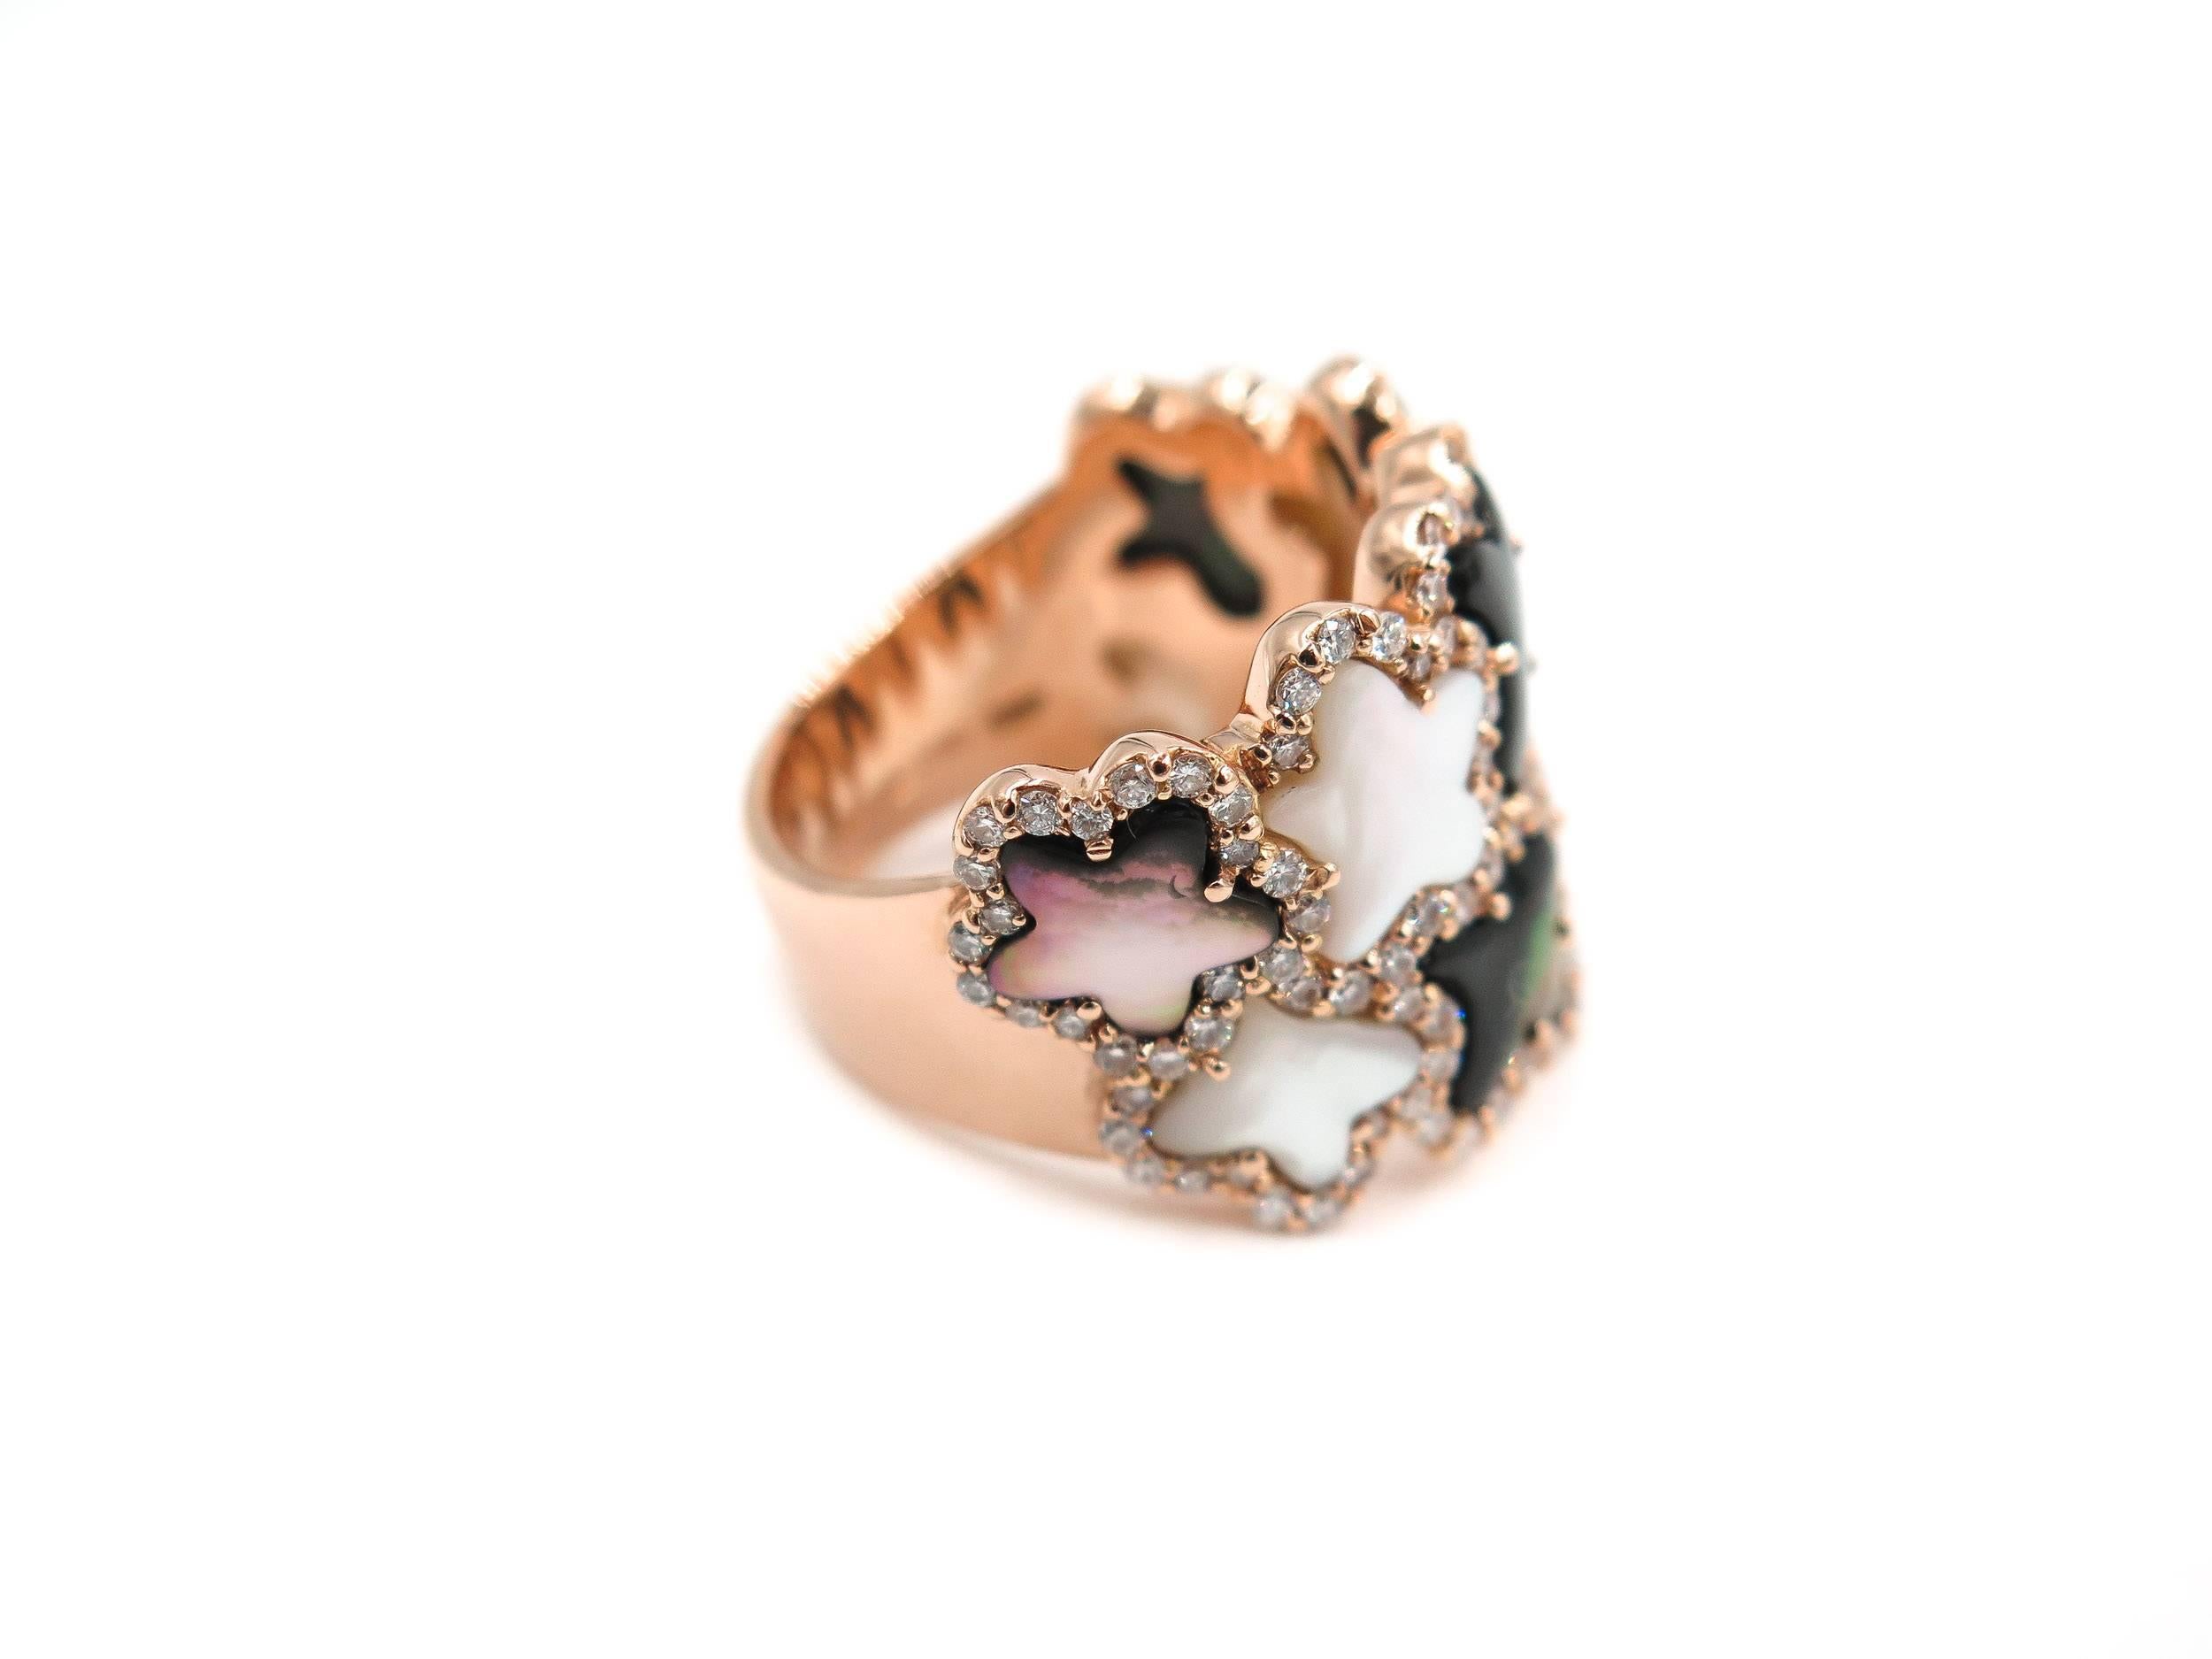 Exquisite workmanship on this tapestry of Black and White Mother-of-Pearl accentuated by diamonds creating a contrast that will definitely make you the star of a conversation.
Wide band wrapped in the lightness of a rose gold handcrafted and